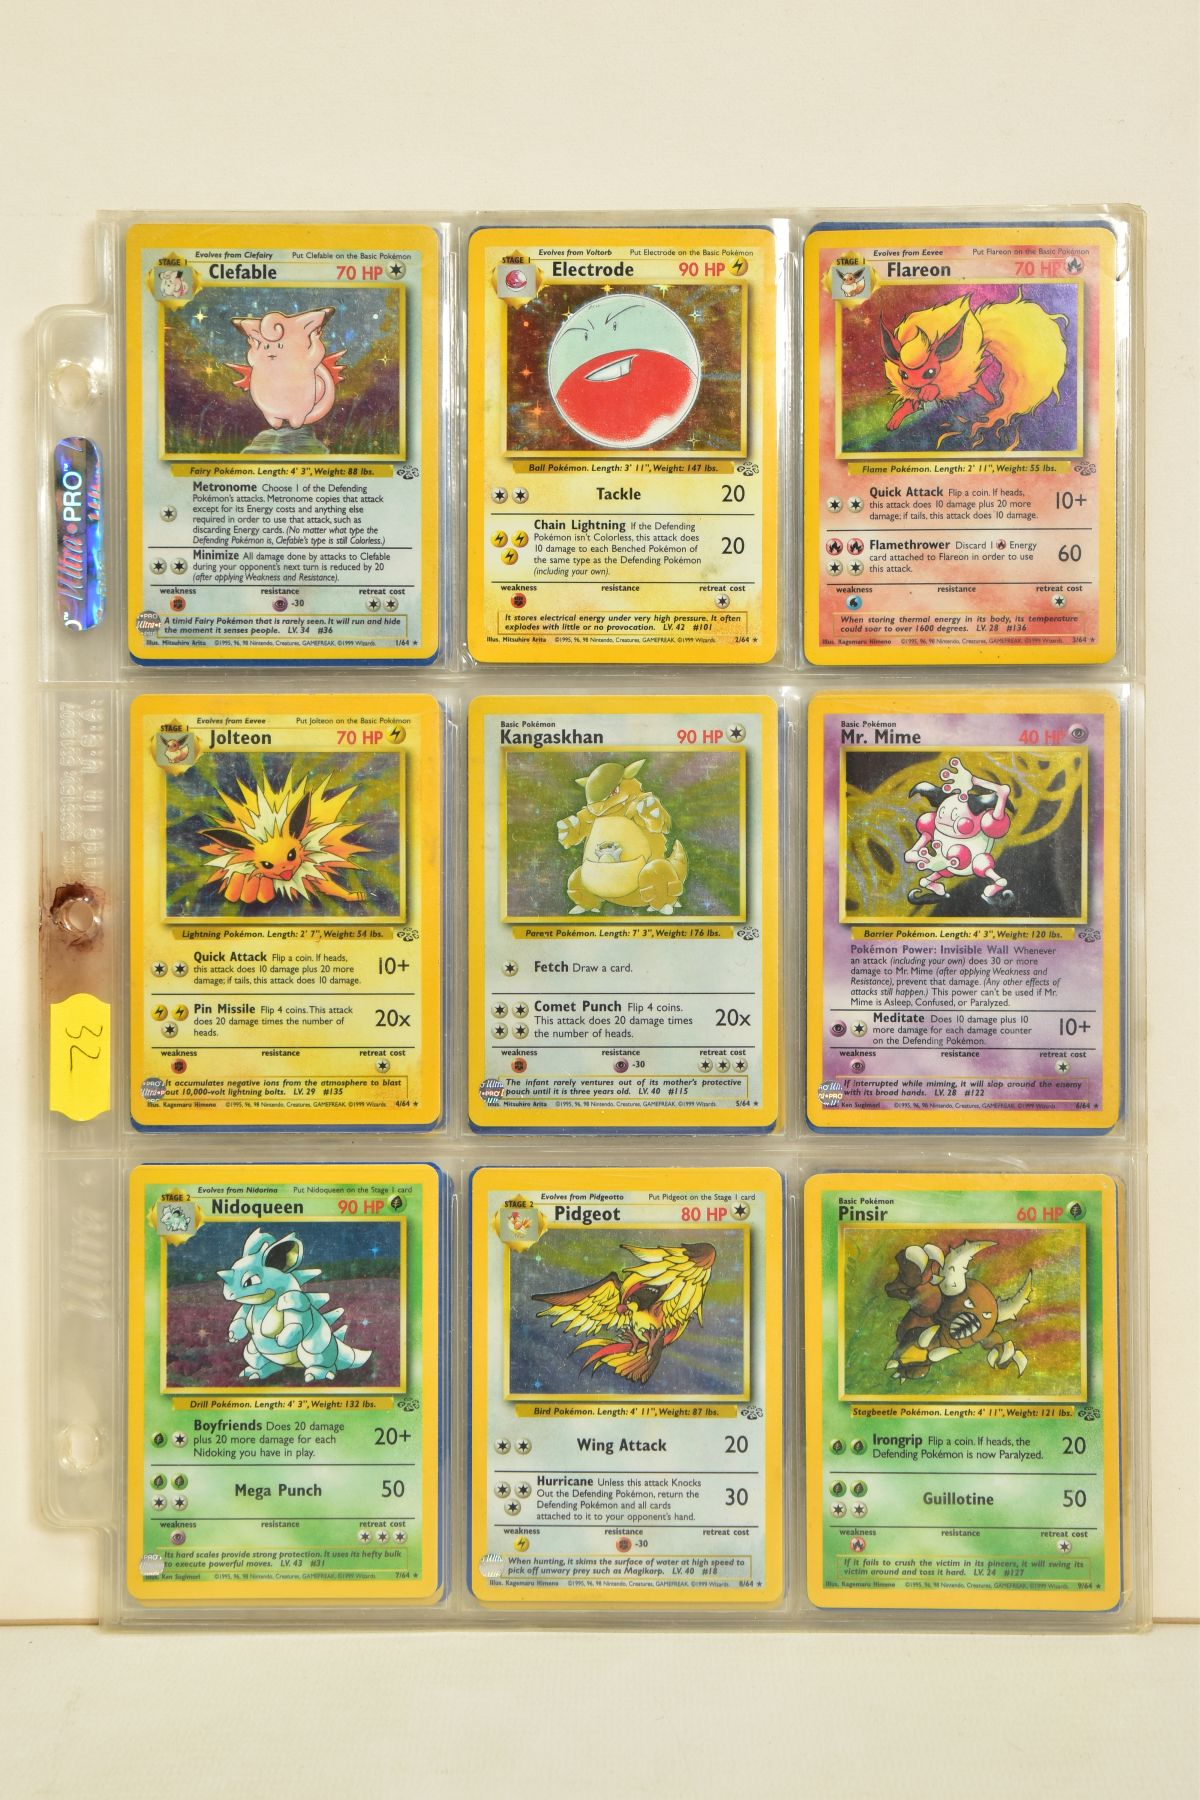 A COMPLETE POKEMON JUNGLE SET, all 64 cards that make up Jungle Set are present, card condition is